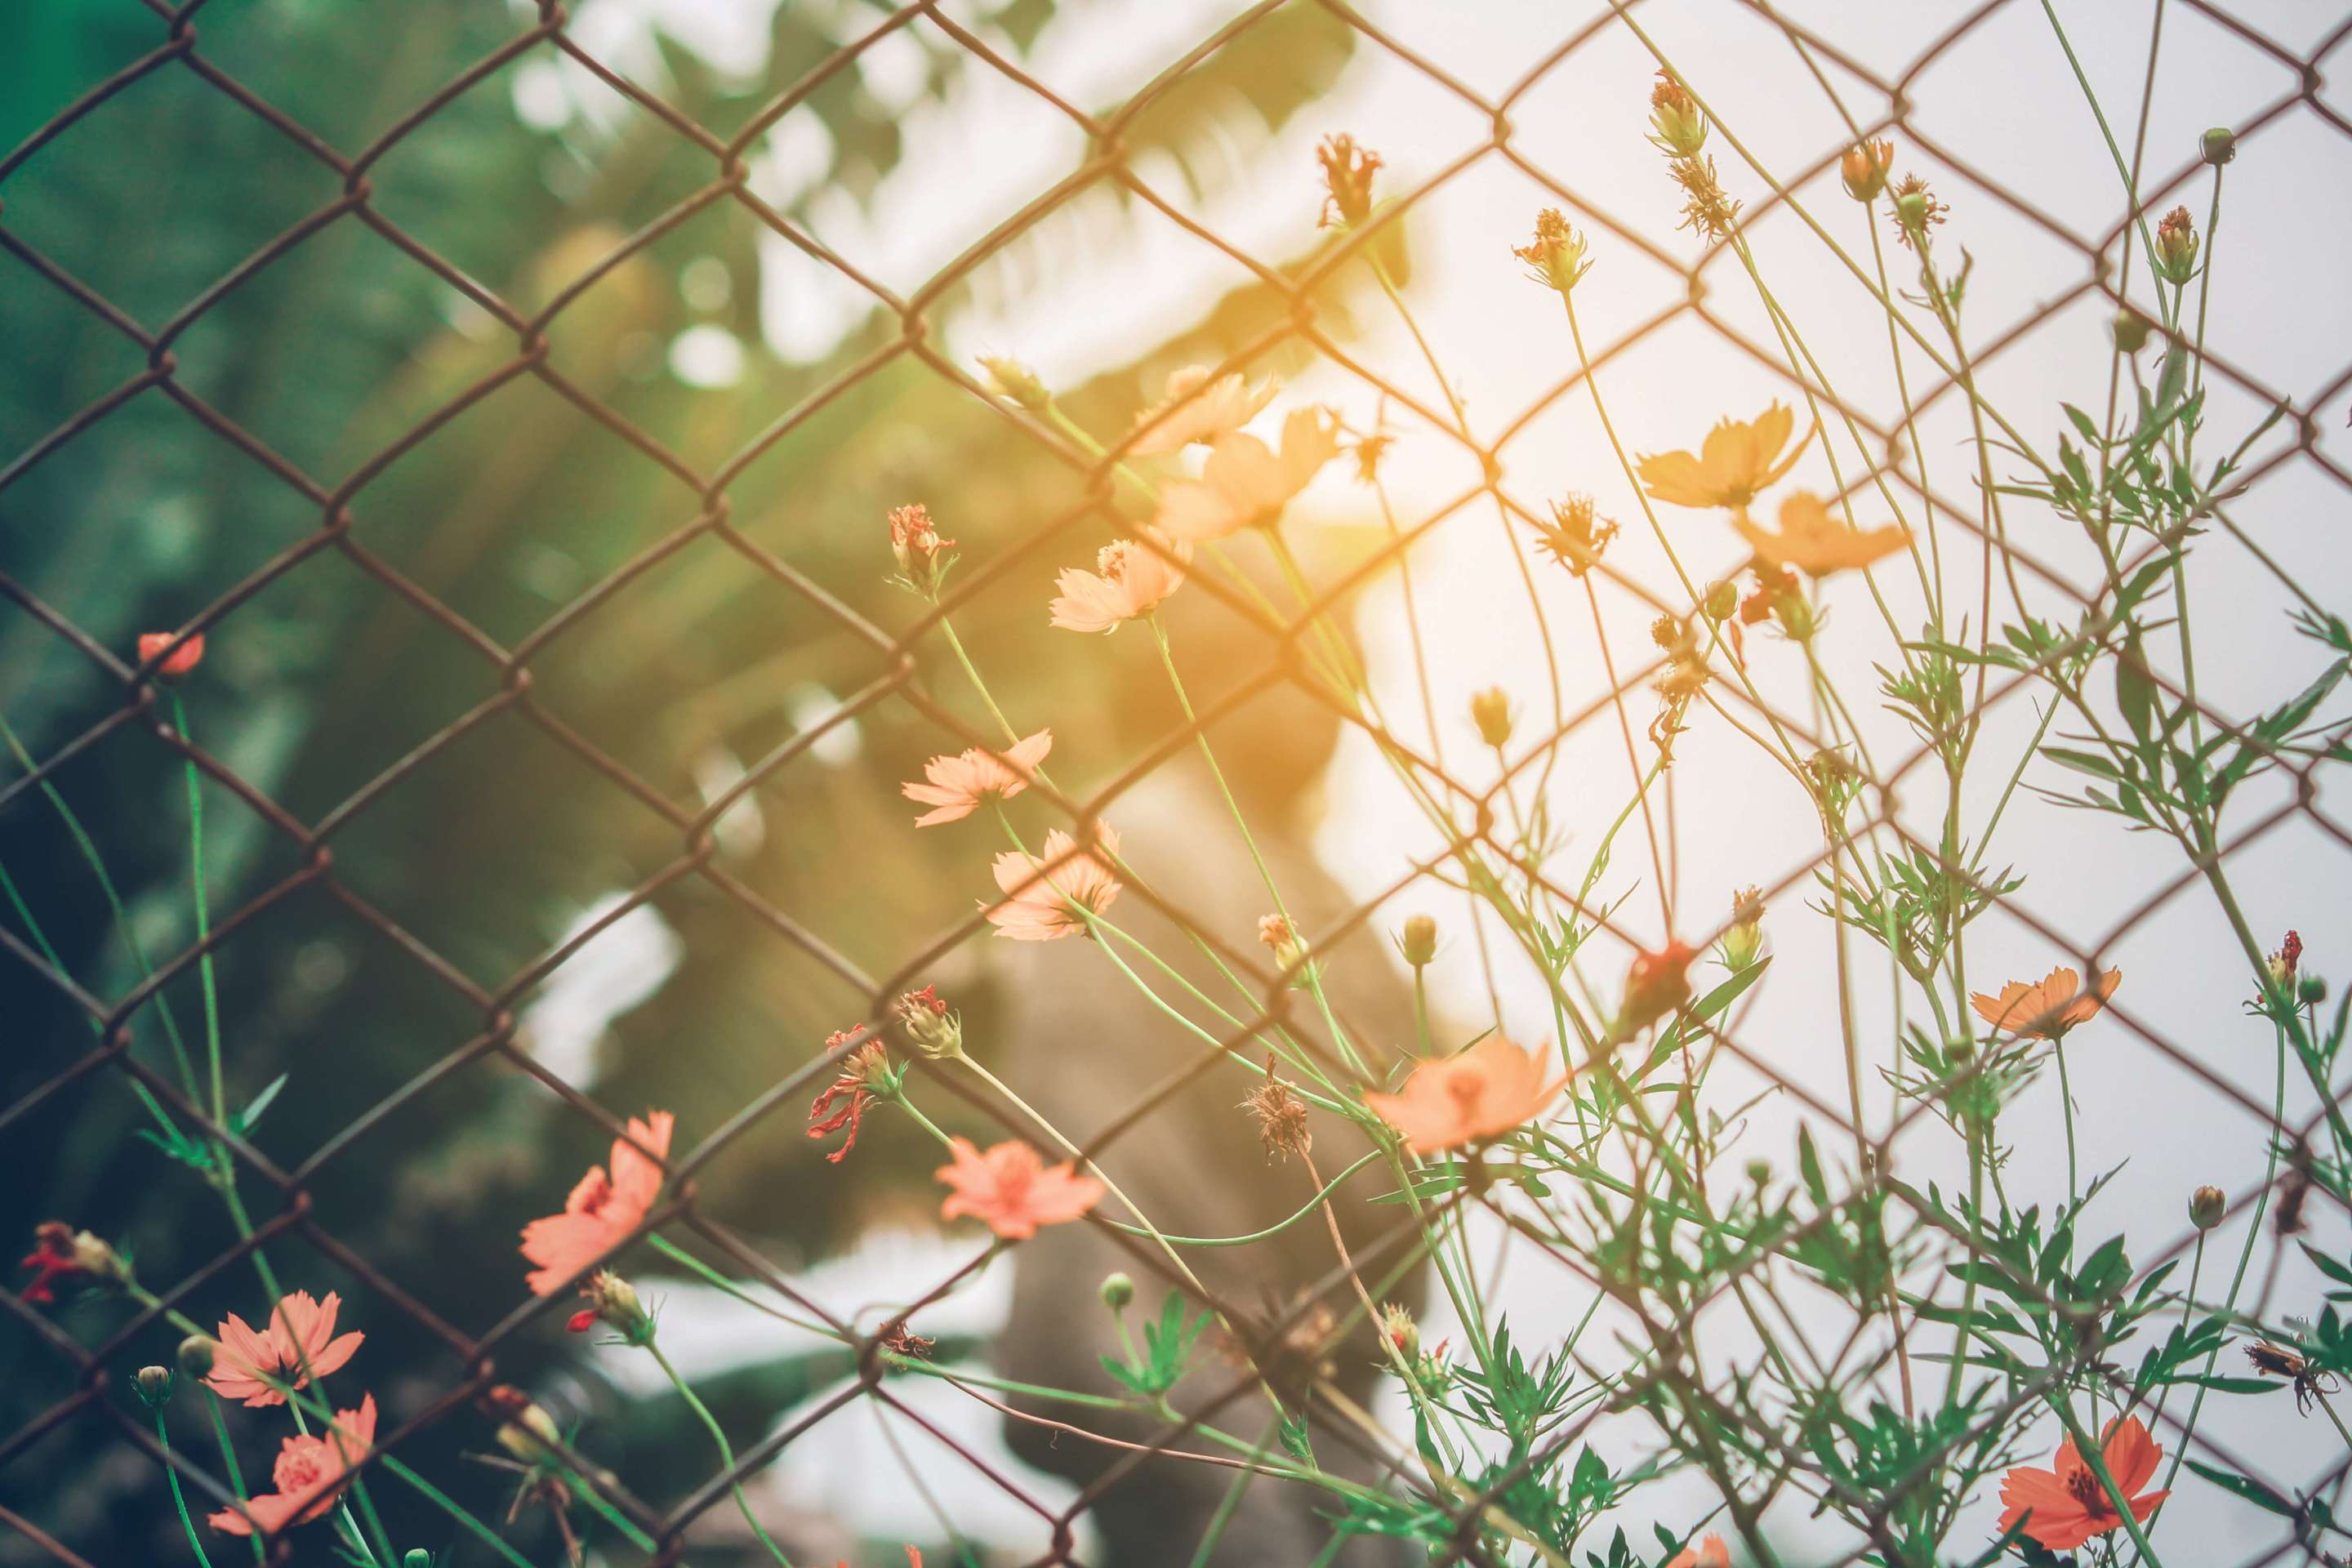 Chain link fence with sun shining through flowers.